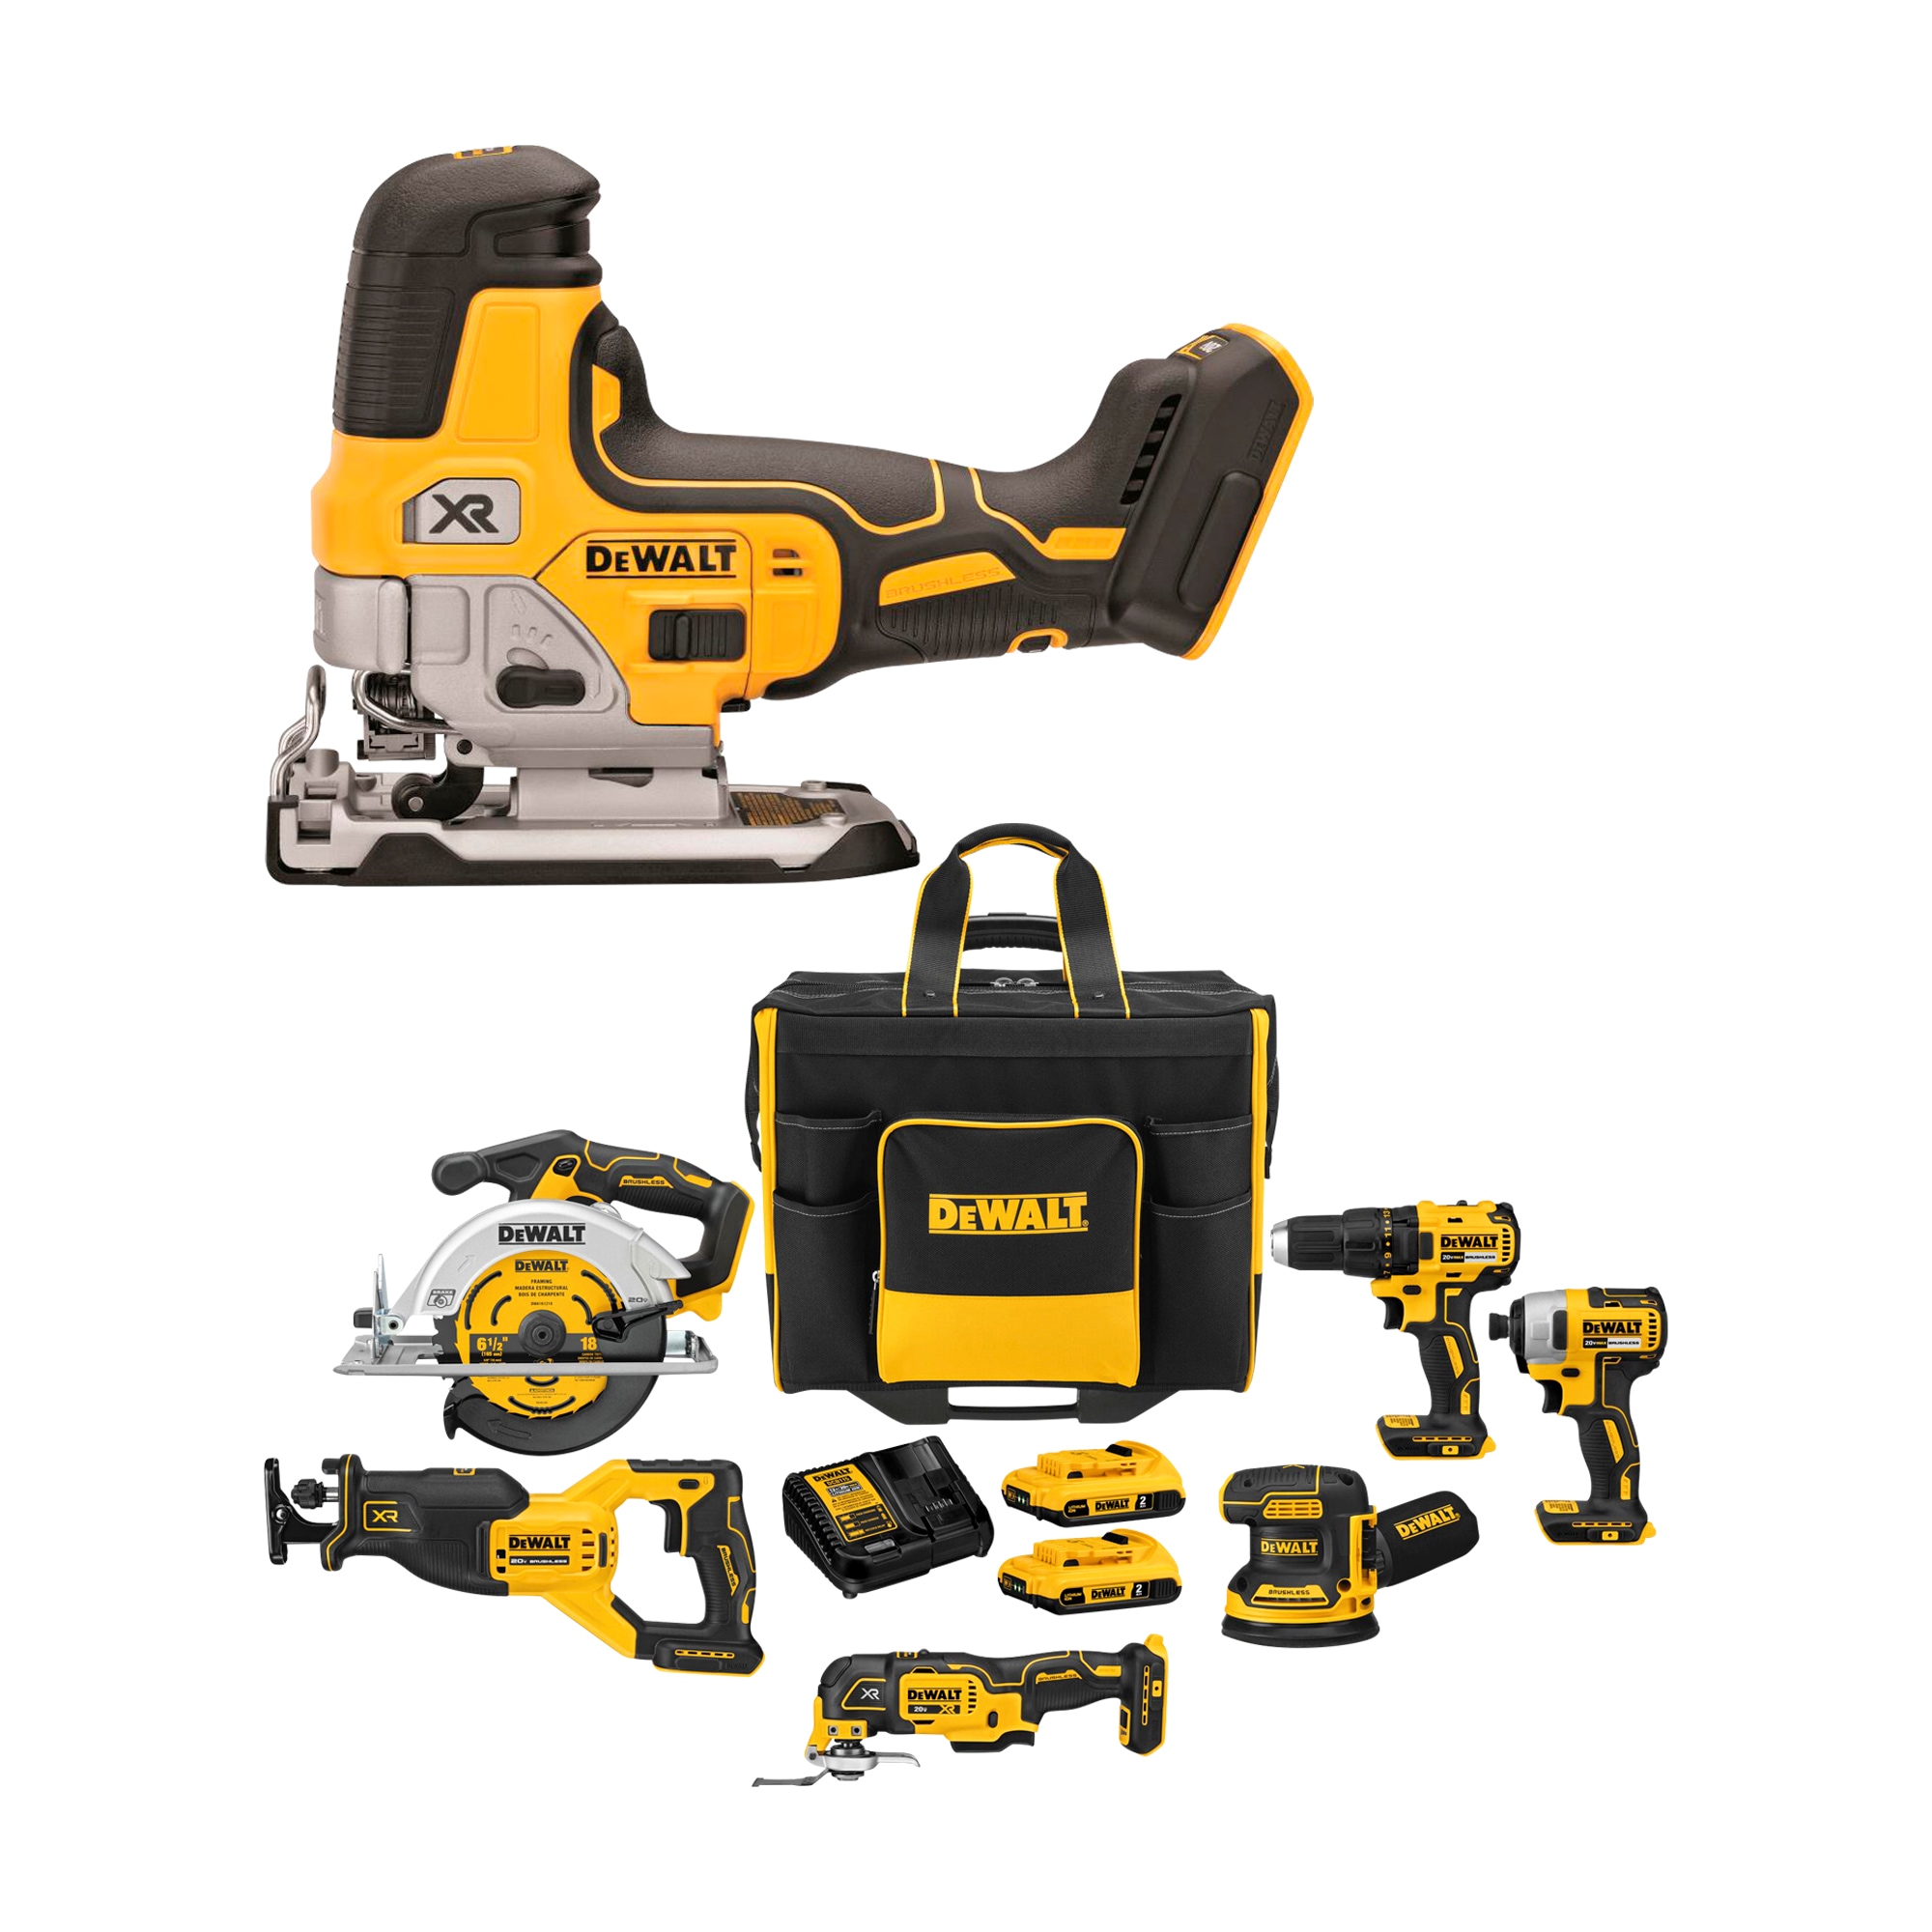 Shop DEWALT 20V MAX Brushless Cordless 6-Tool Combo Kit with Large Site-Ready Bag & 20-Volt Max Brushless Variable Speed Keyless at Lowes.com